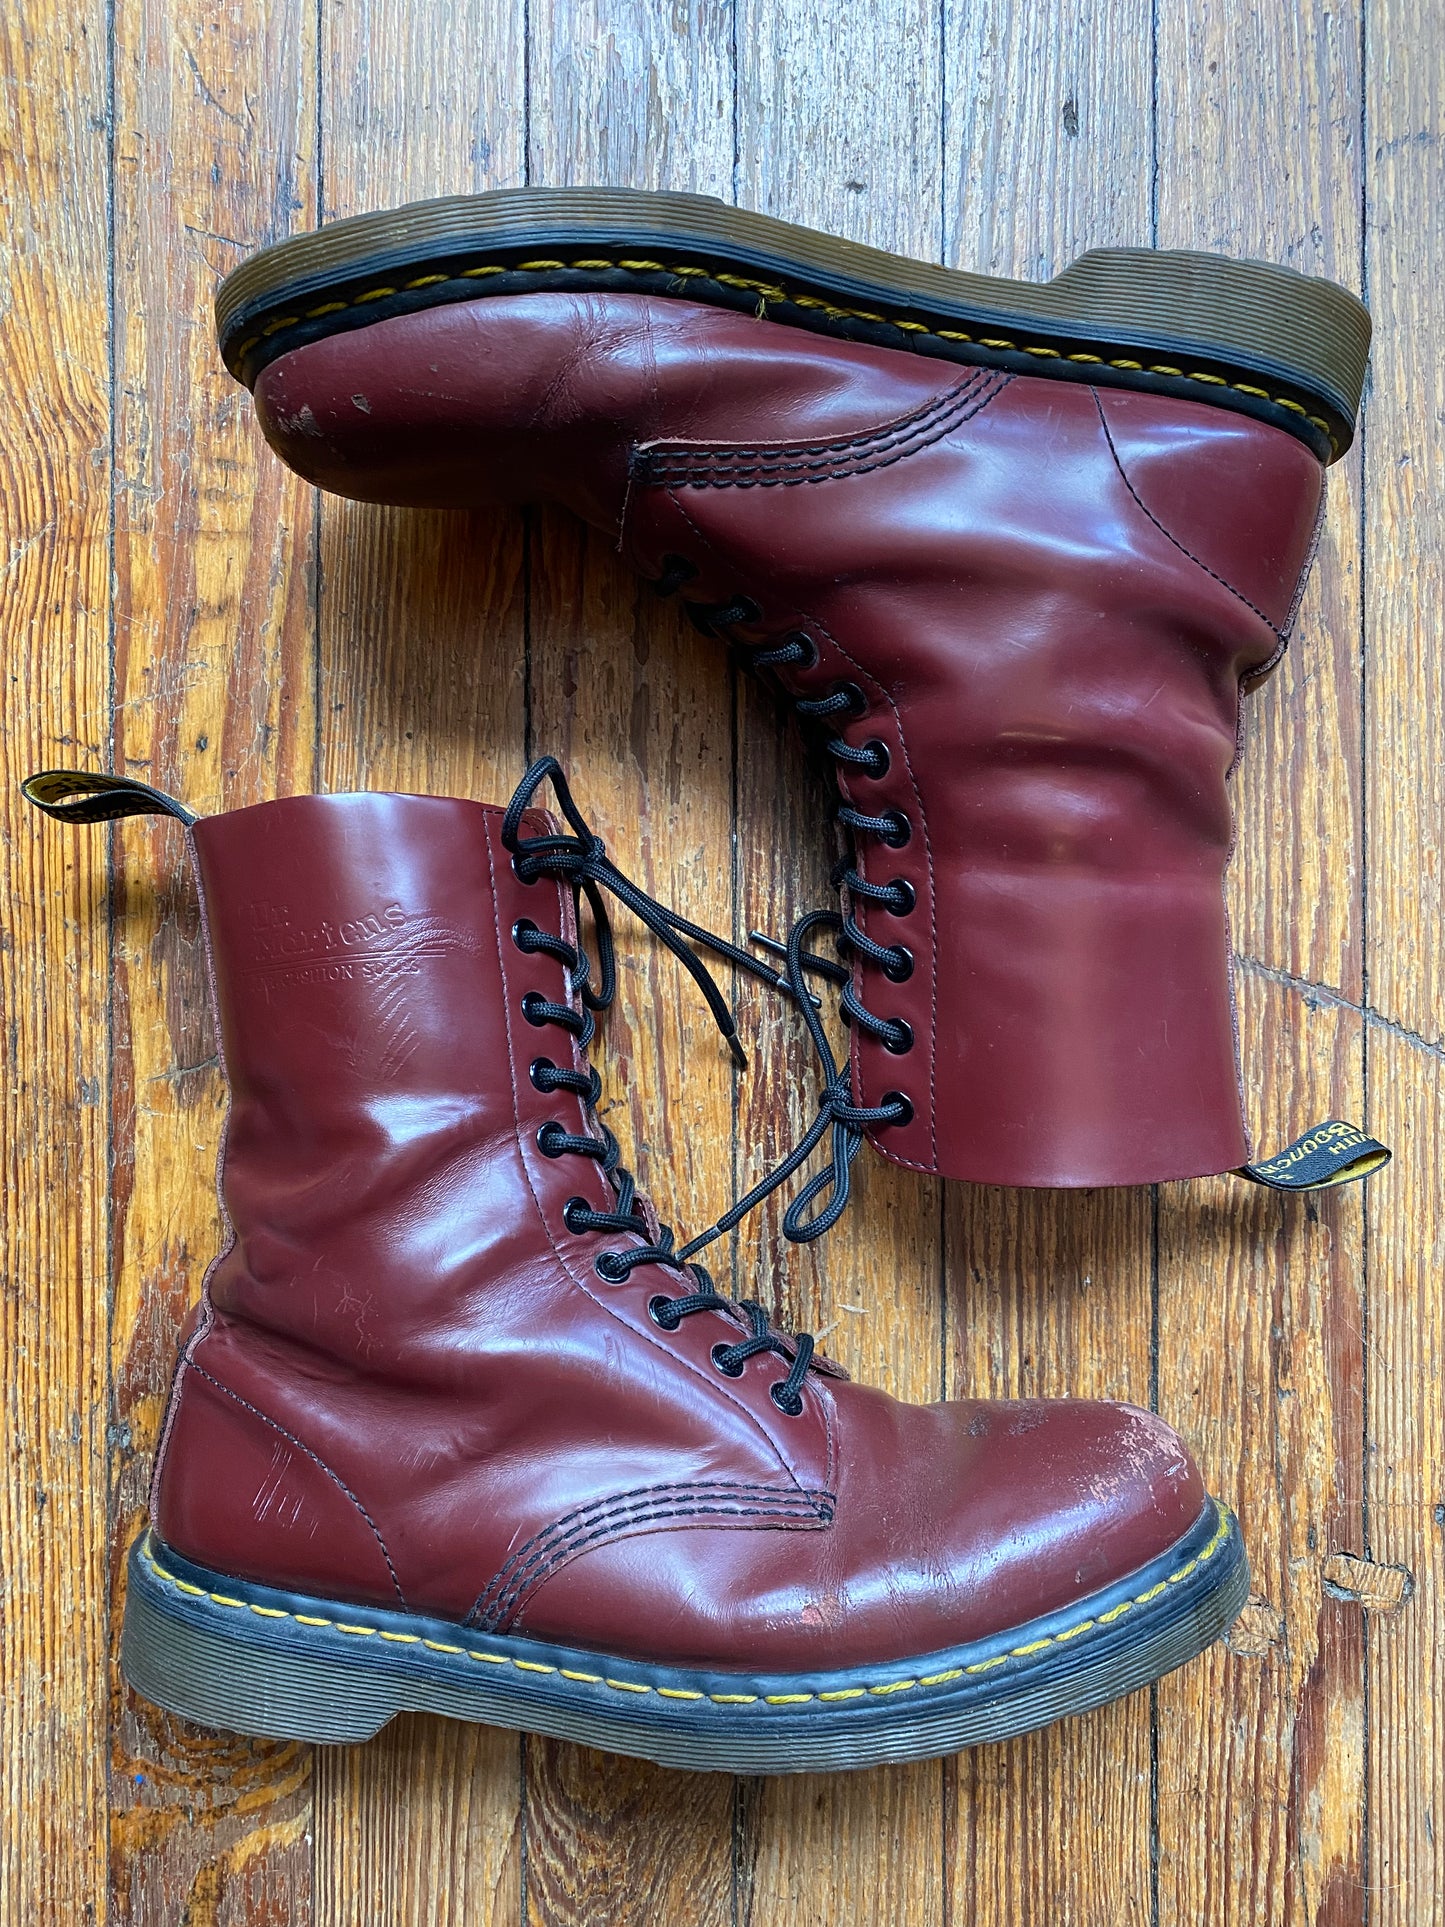 Doc Martens Smooth Cherry Red 1460 10 Eyelet Lace Up Boots